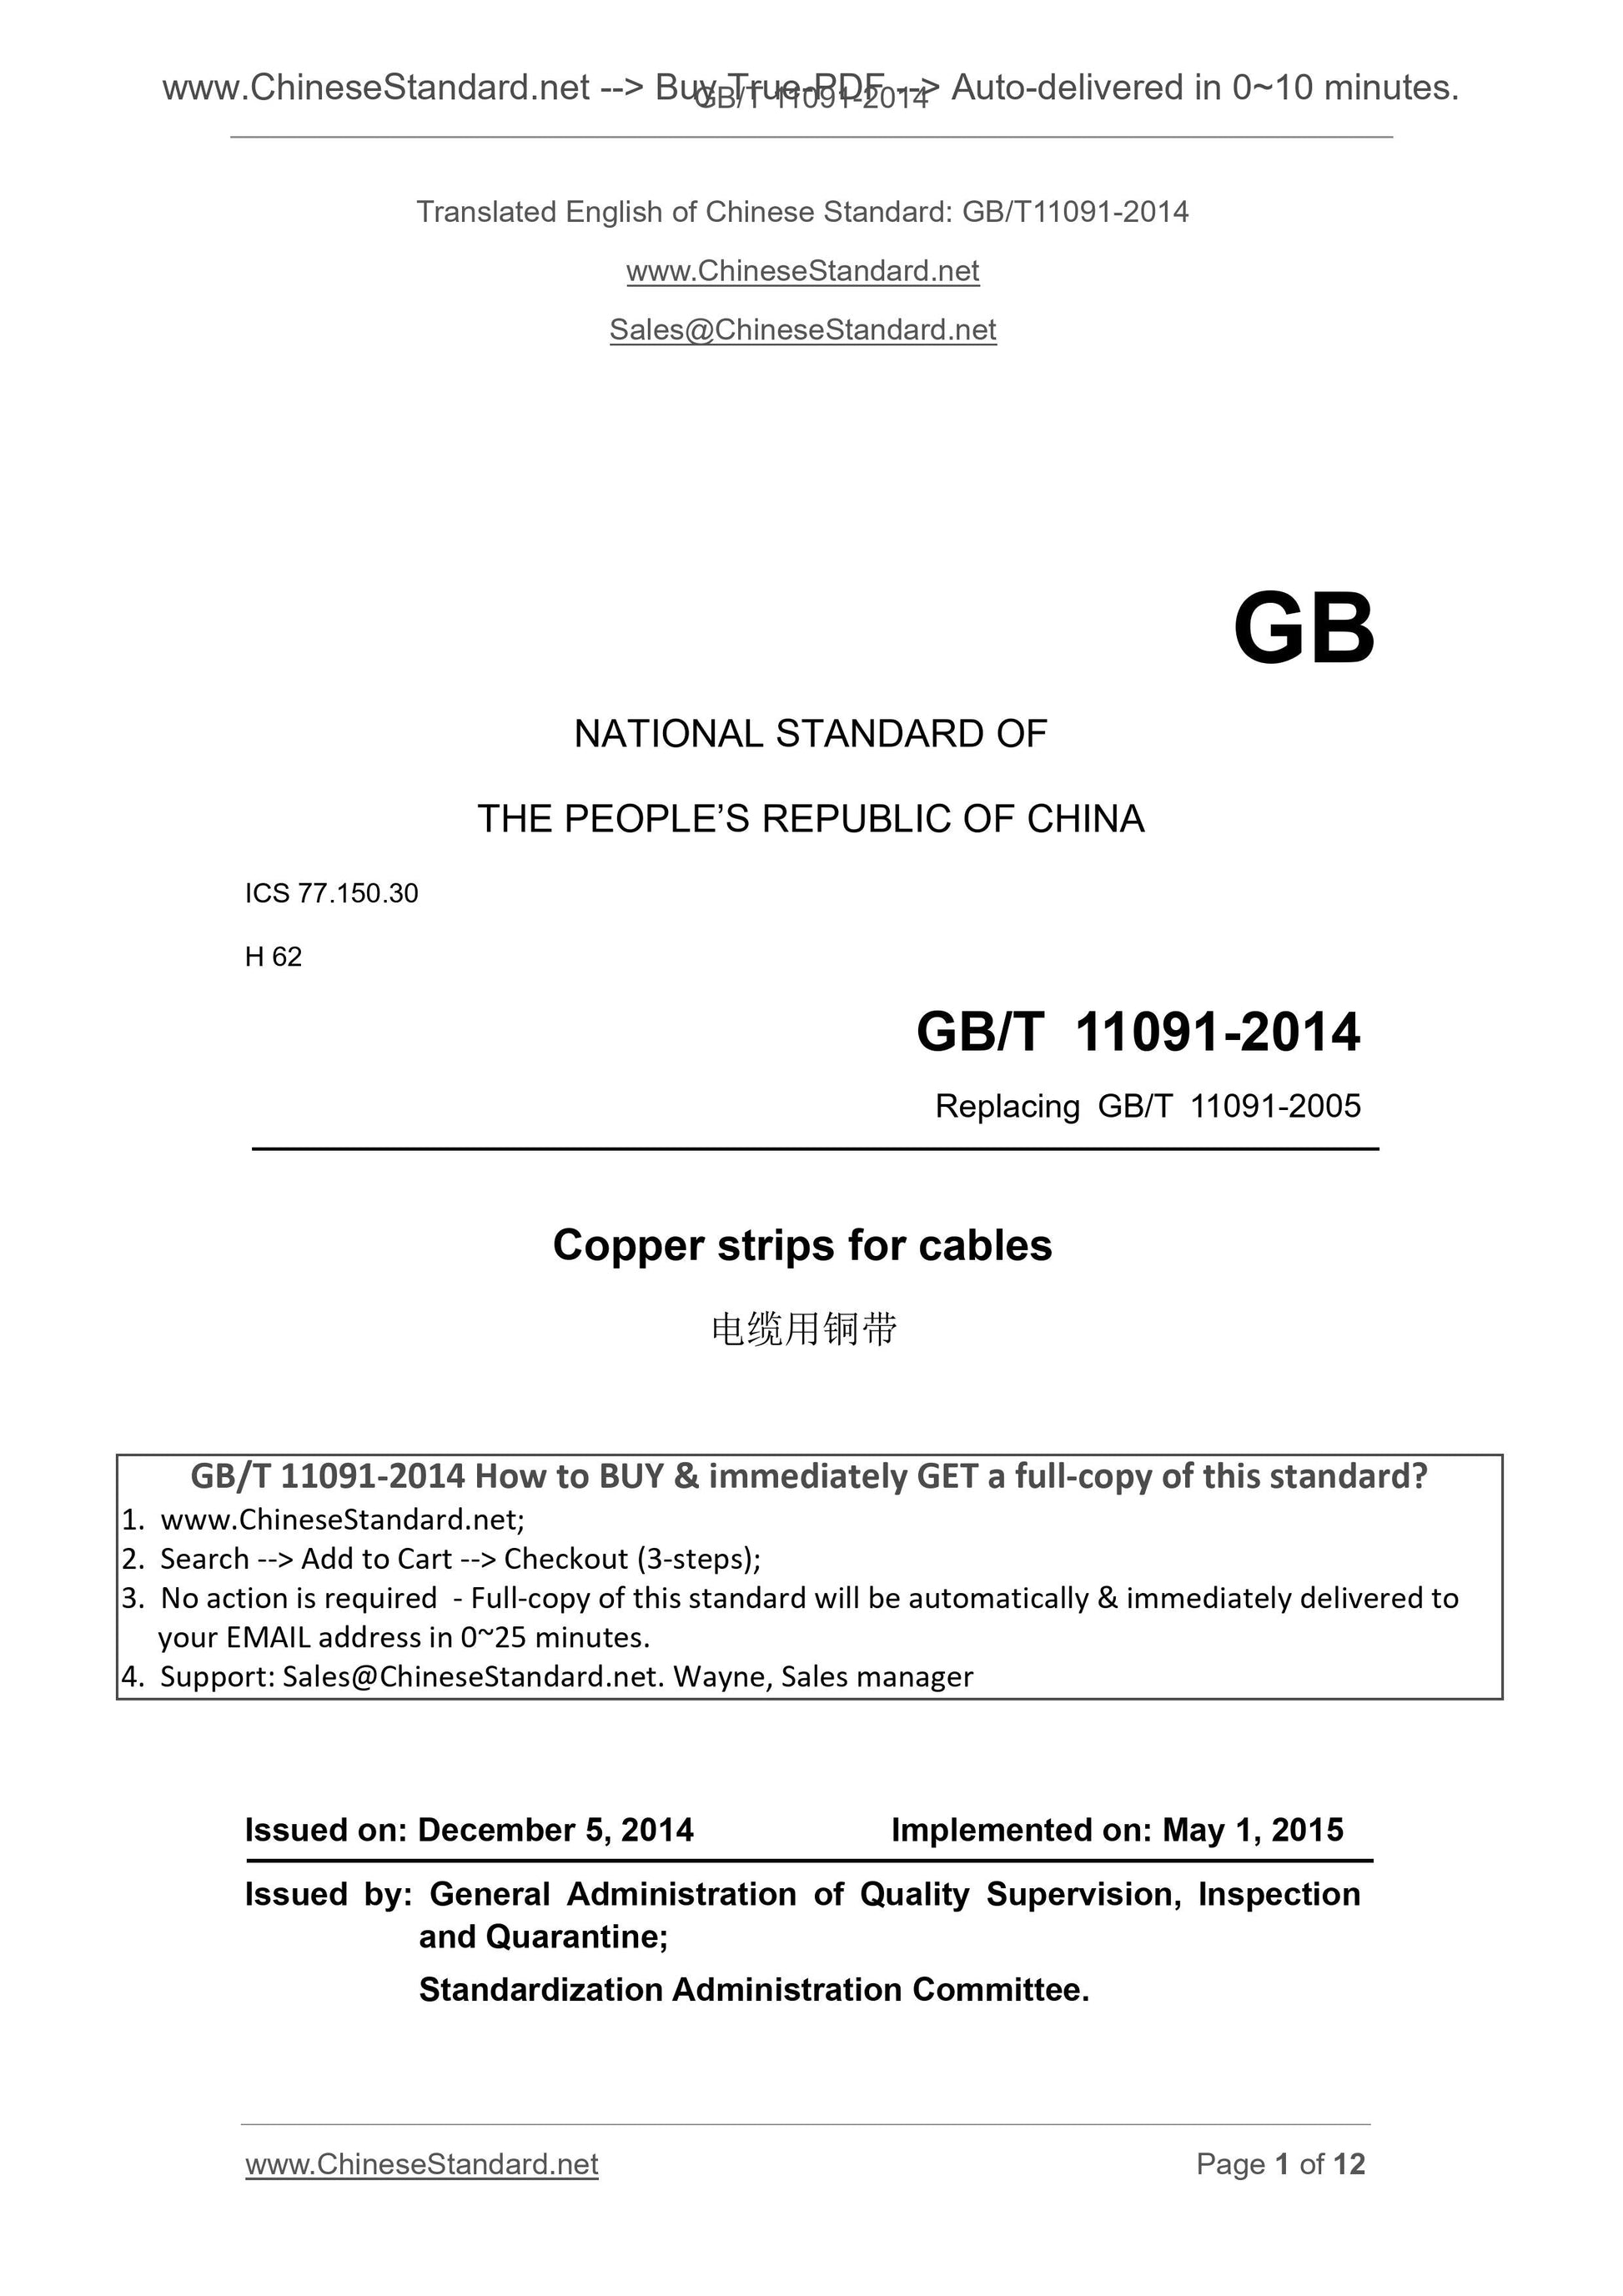 GB/T 11091-2014 Page 1